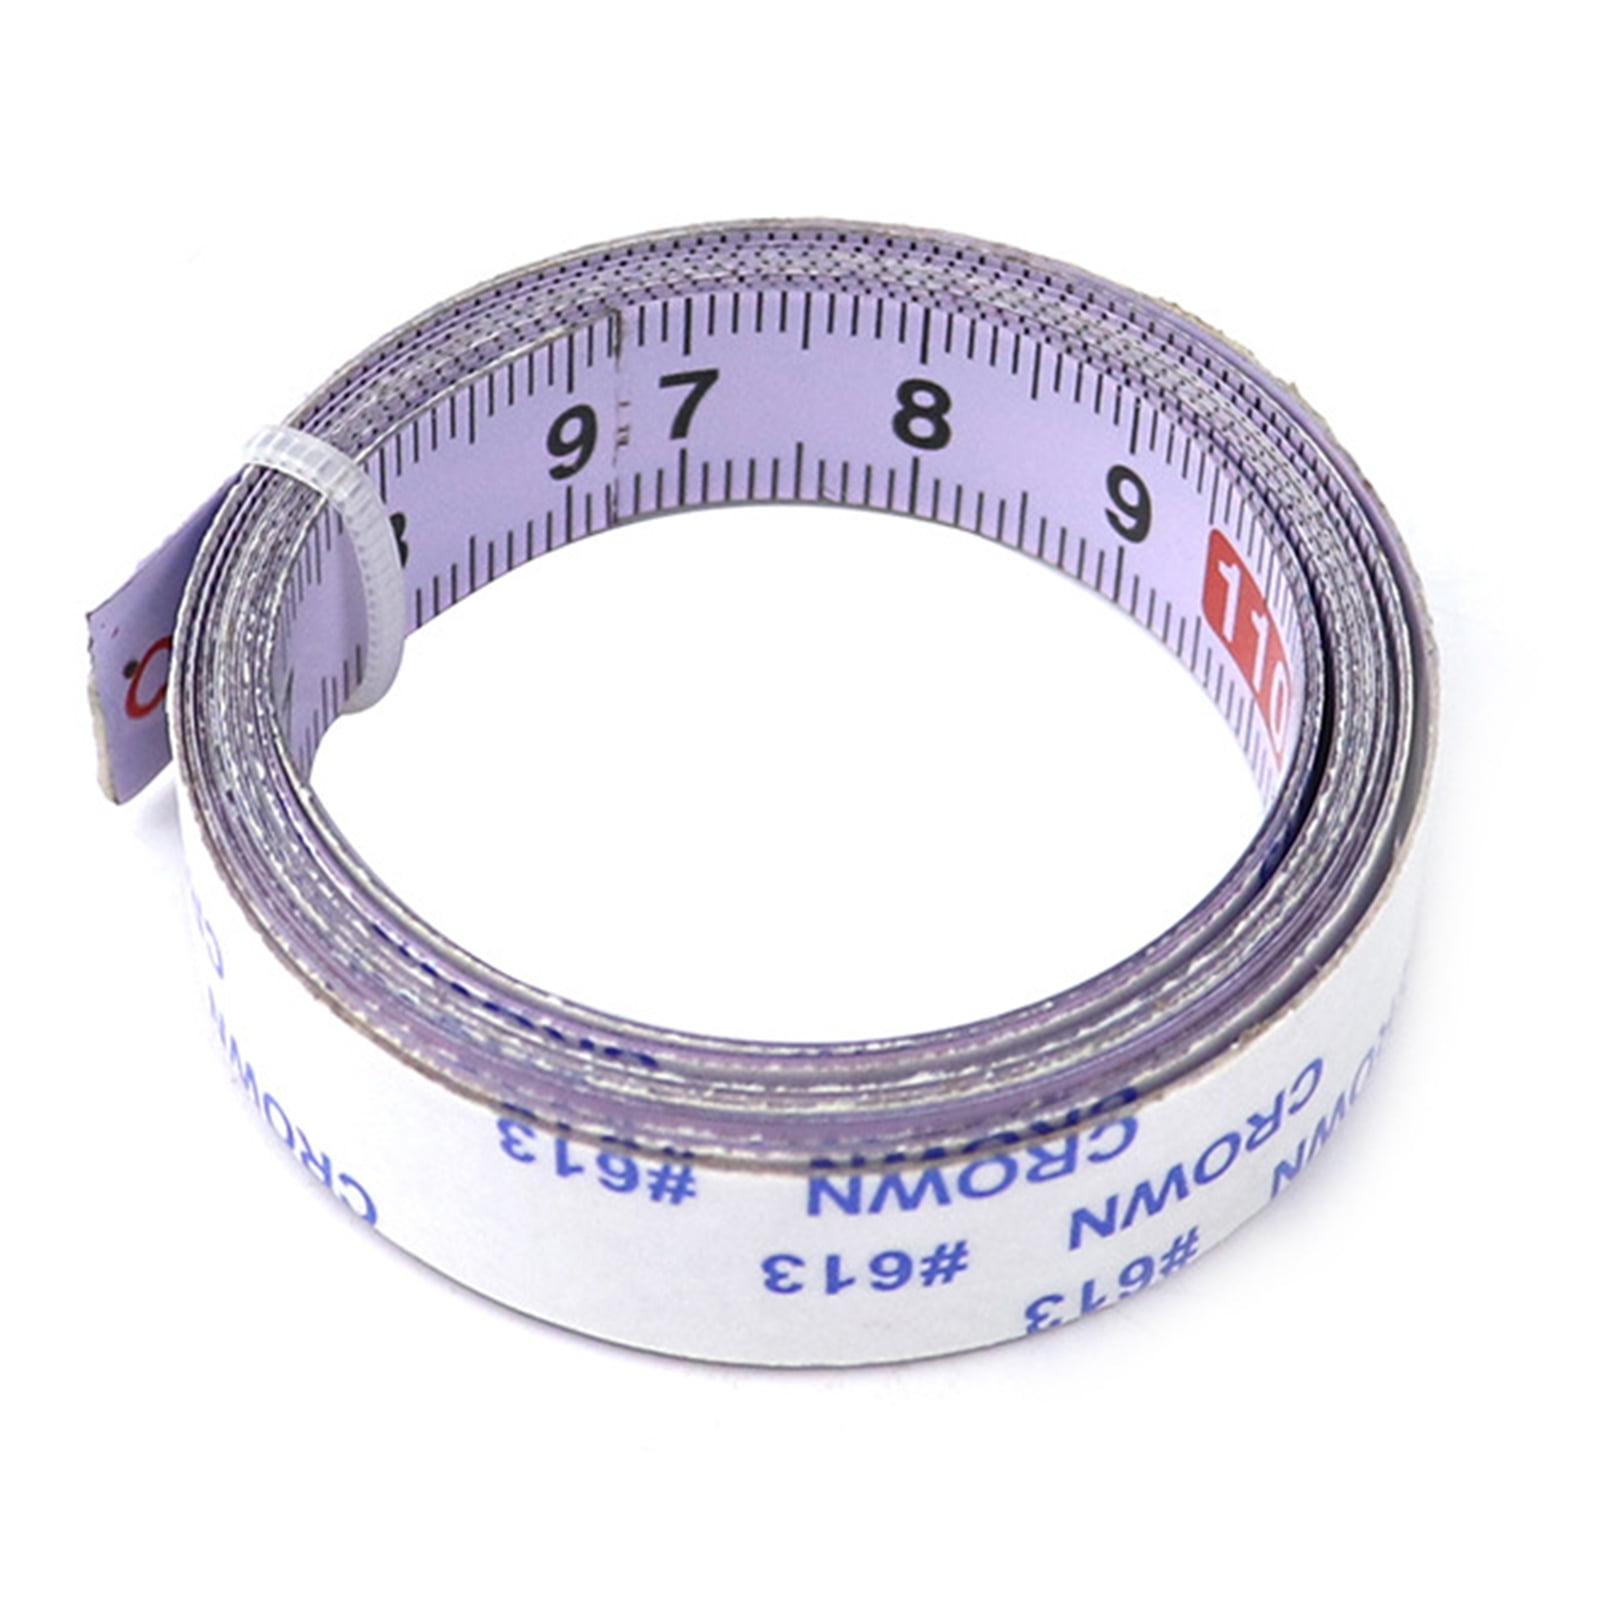 Metal Metric Scale Ruler 1/2/3 M For Woodworking W/ Self-adhesive Tape Tool Sale 